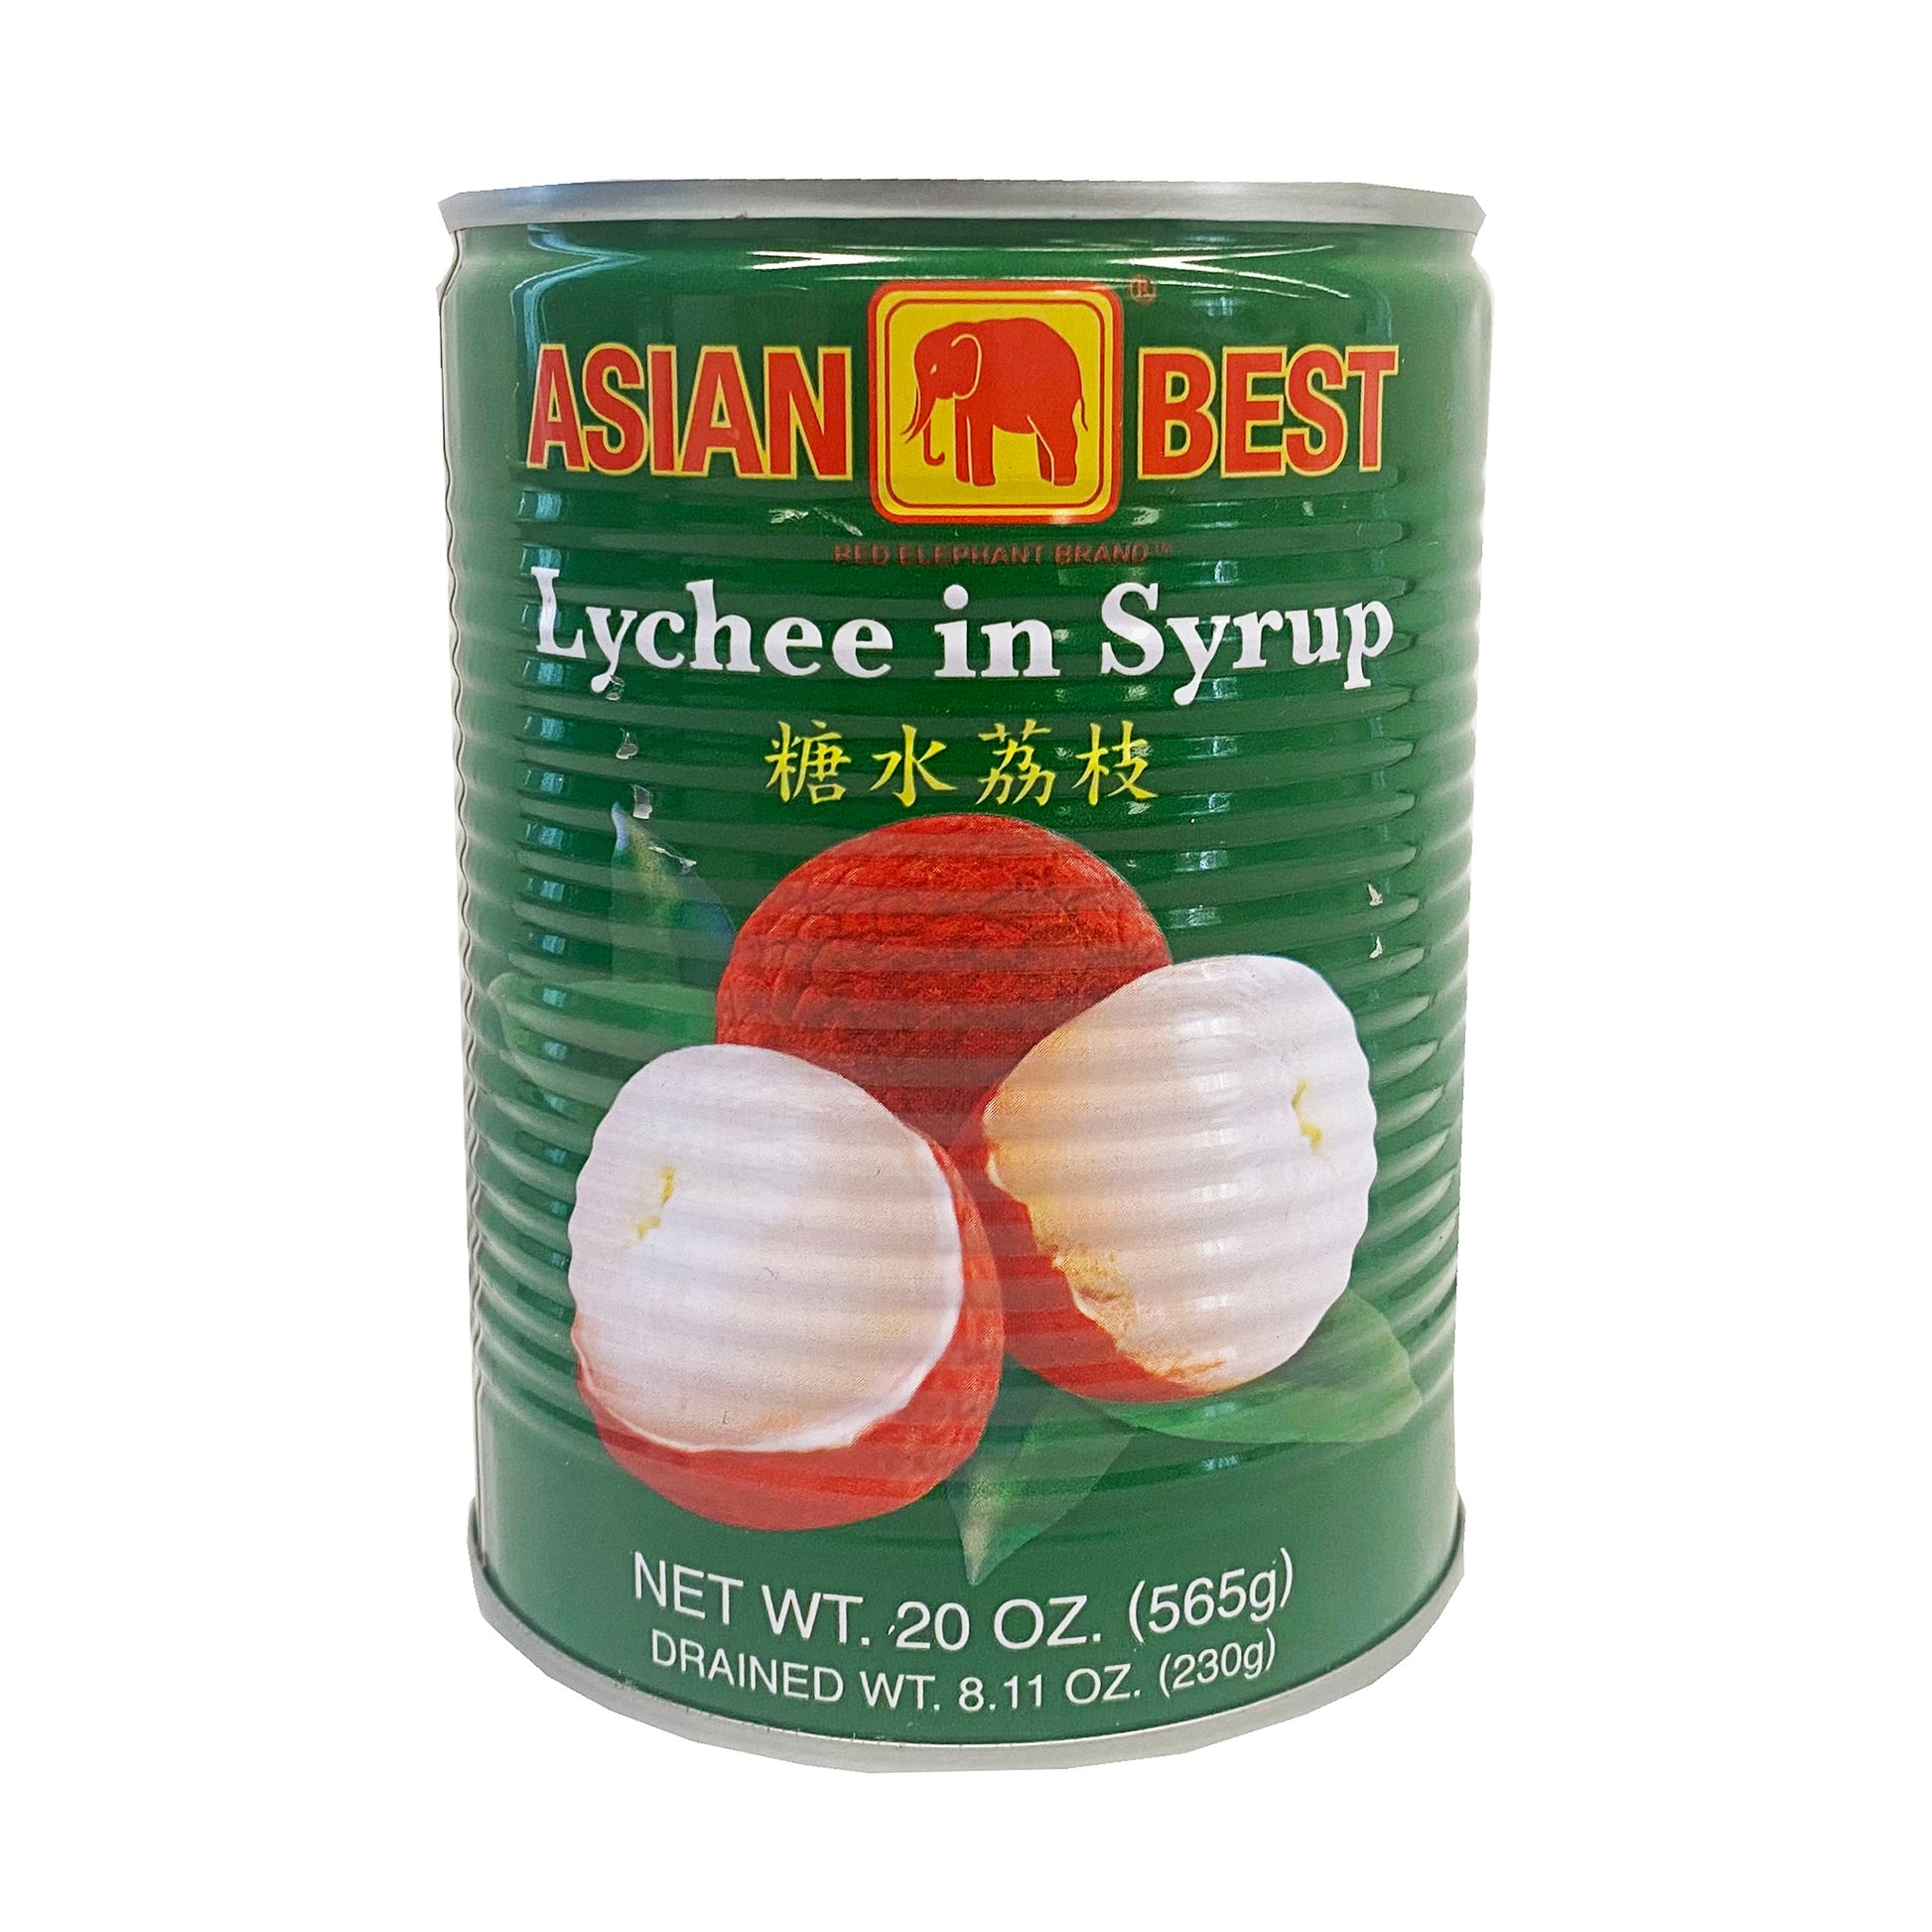 Front graphic image of Asian Best Lychee in Syrup 20oz